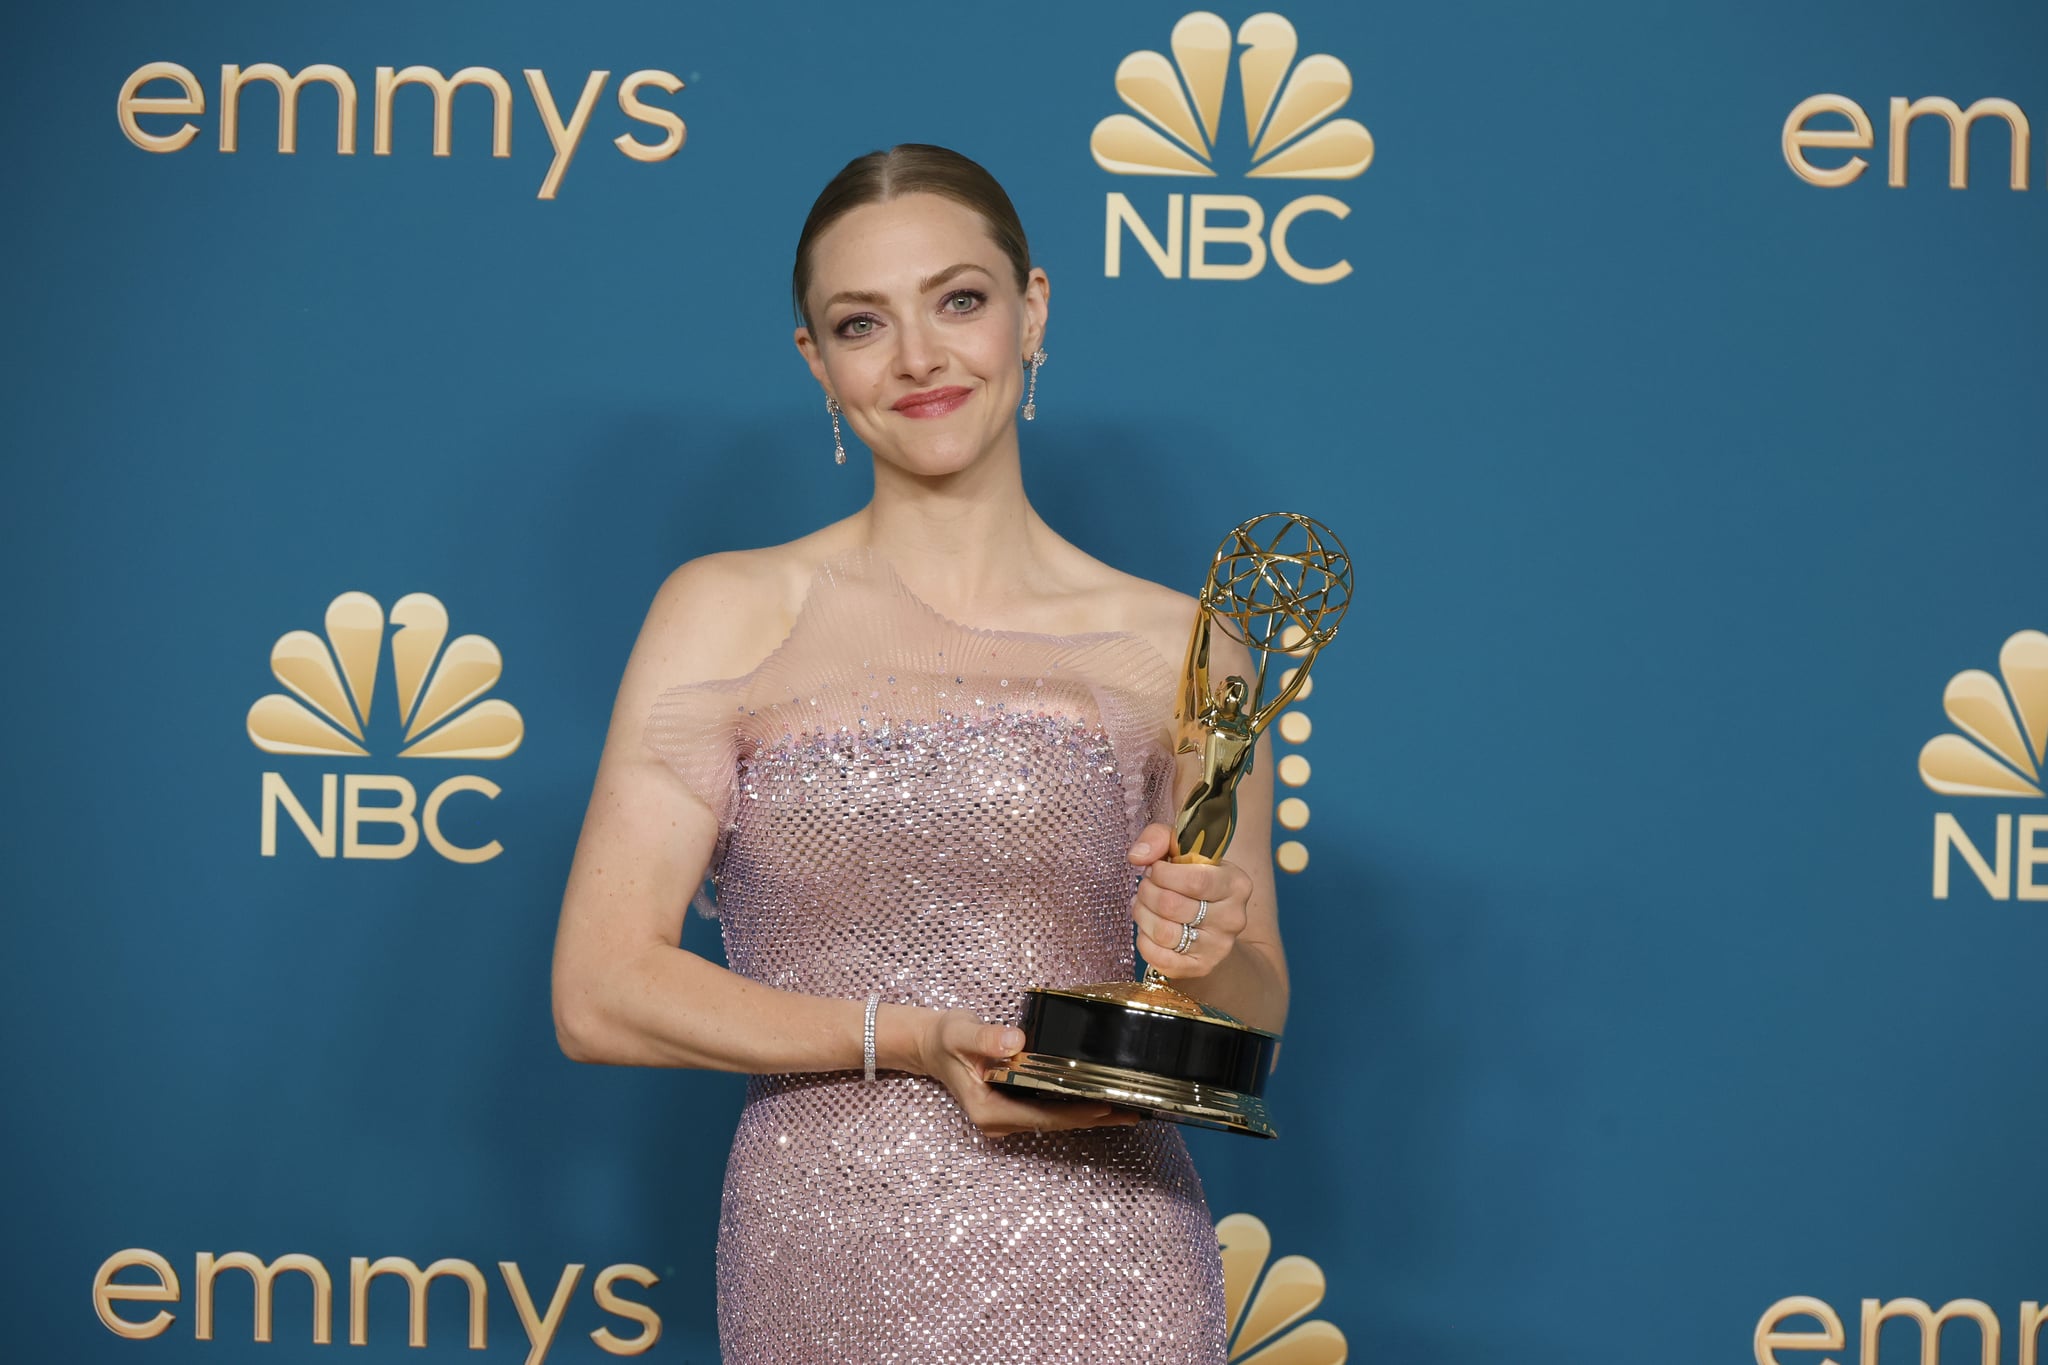 LOS ANGELES, CALIFORNIA - SEPTEMBER 12: Amanda Seyfried, winner of the Outstanding Lead Actress in a Limited or Anthology Series or Movie award for 'The Dropout,' poses in the press room during the 74th Primetime Emmys at Microsoft Theatre on September 12, 2022 in Los Angeles, California. (Photo by Frazer Harrison/Getty Images)